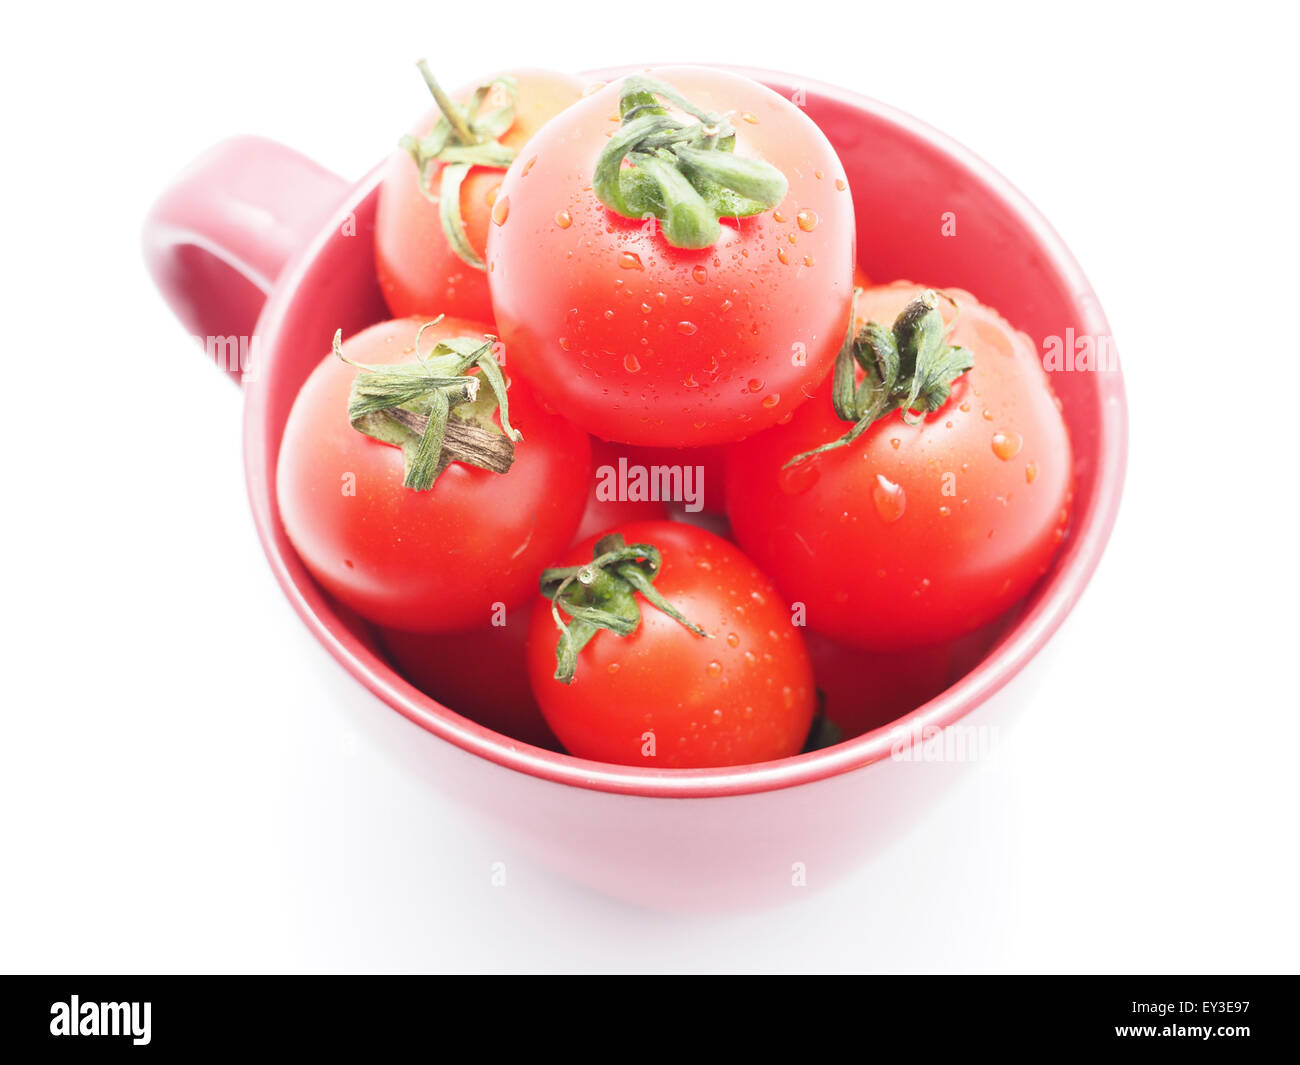 Tomatoes in a bowl on a white background Stock Photo